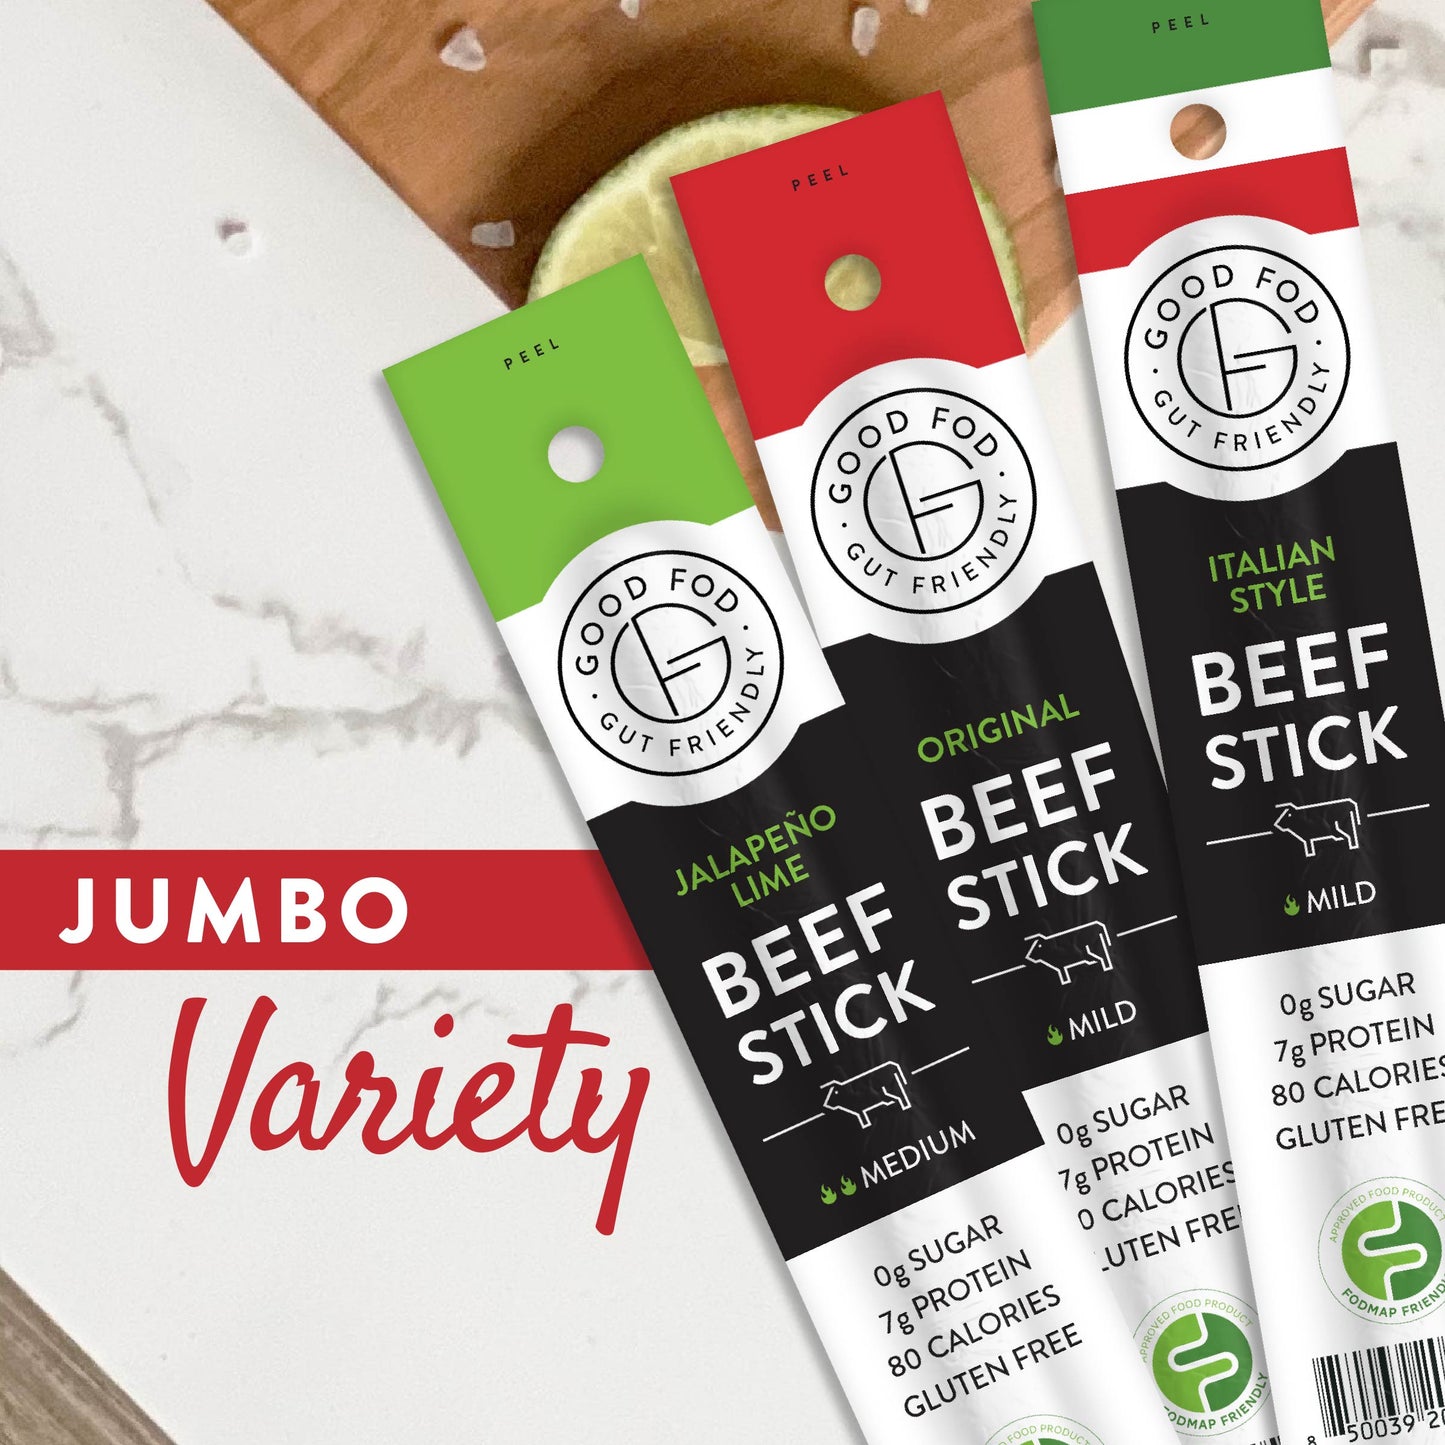 Good Fod Foods Jumbo Variety Pack of Meat Sticks 10 of Each Flavor (30ct) SAVE 10%